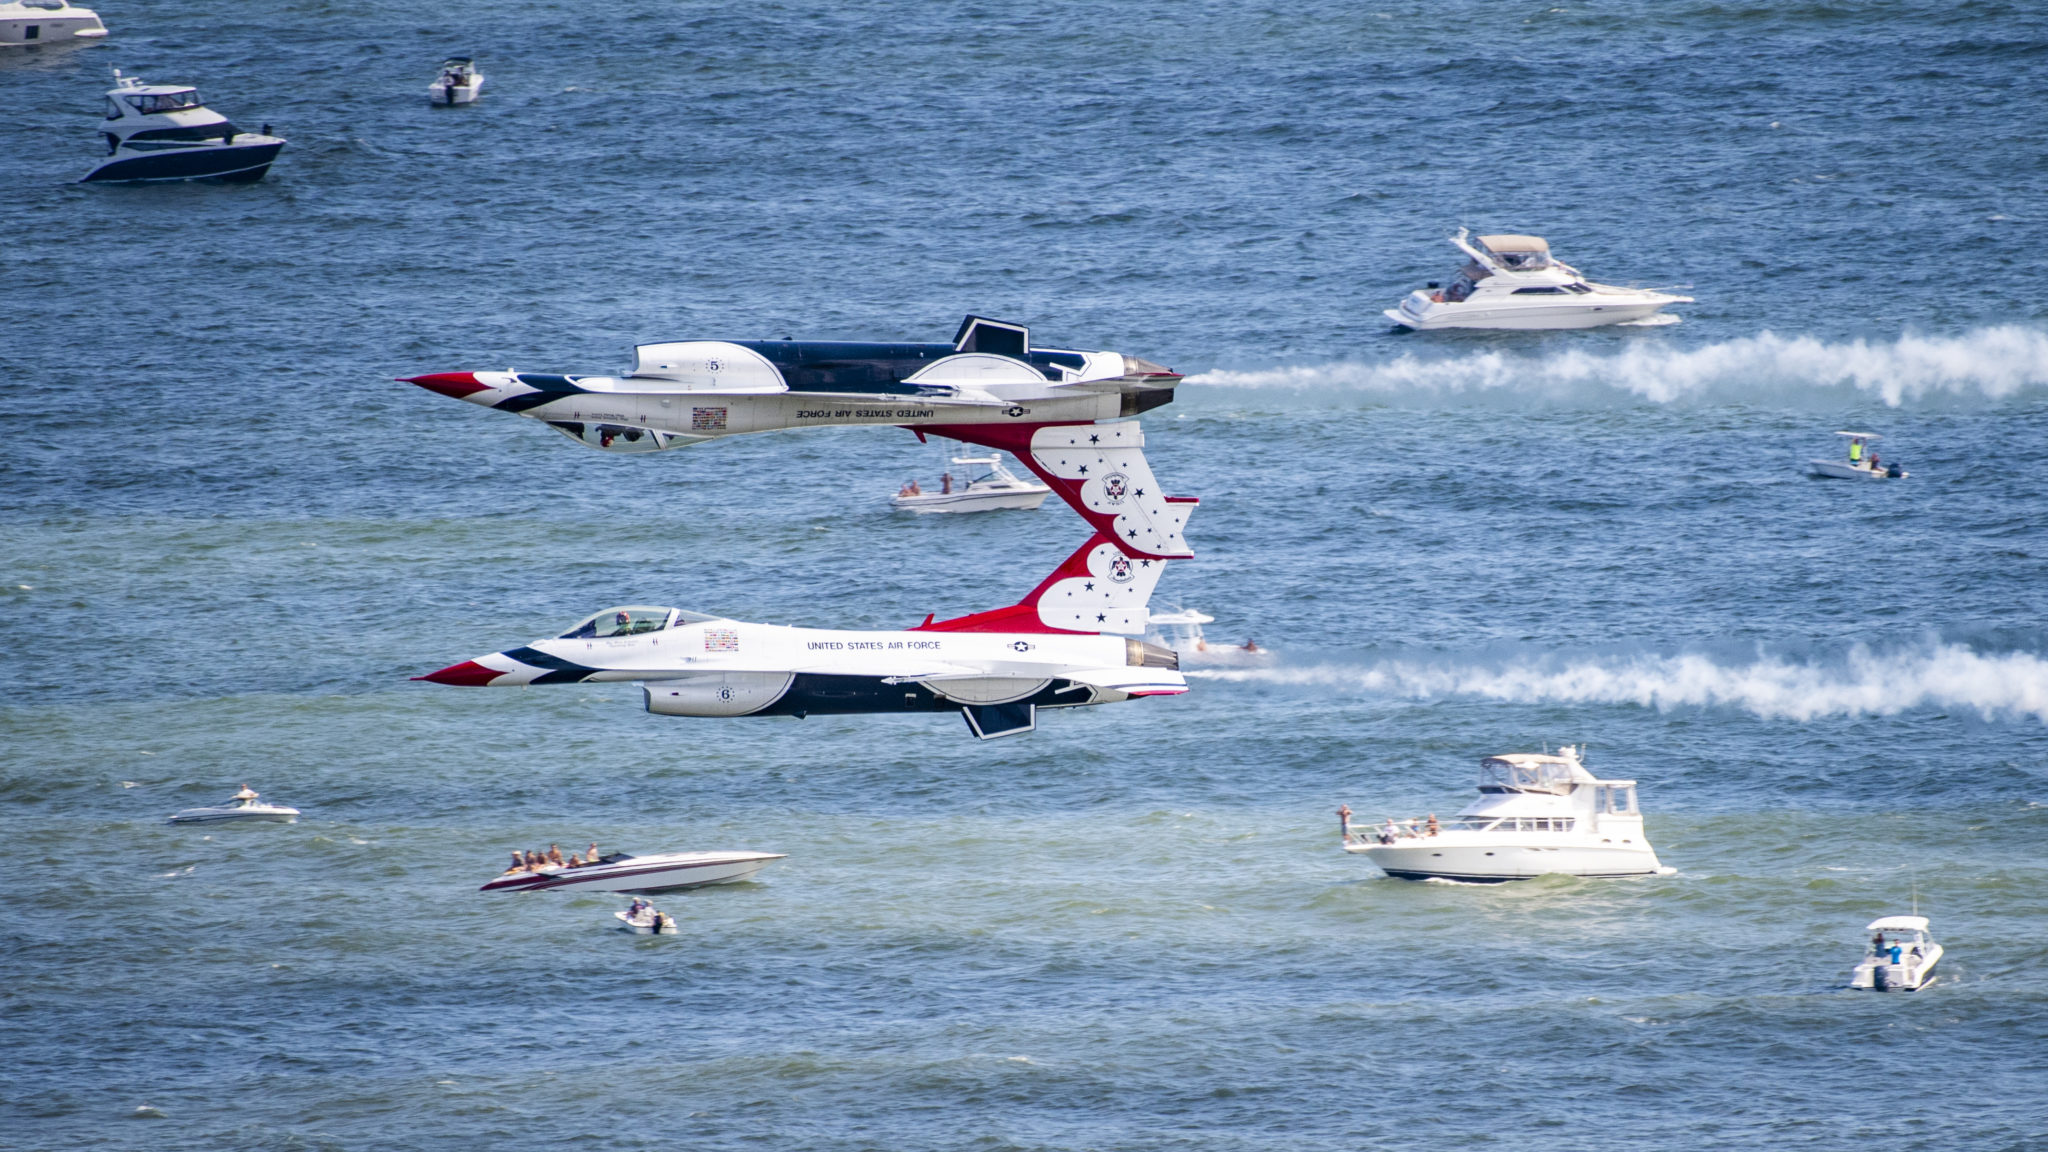 Meet AC Atlantic City Airshow Announces Exciting Civilian Acts and Ticket Info for Popular Flightline Club – Flightline Club Offers an Incomparable VIP Experience to Watch All Military and Civilian Performers –